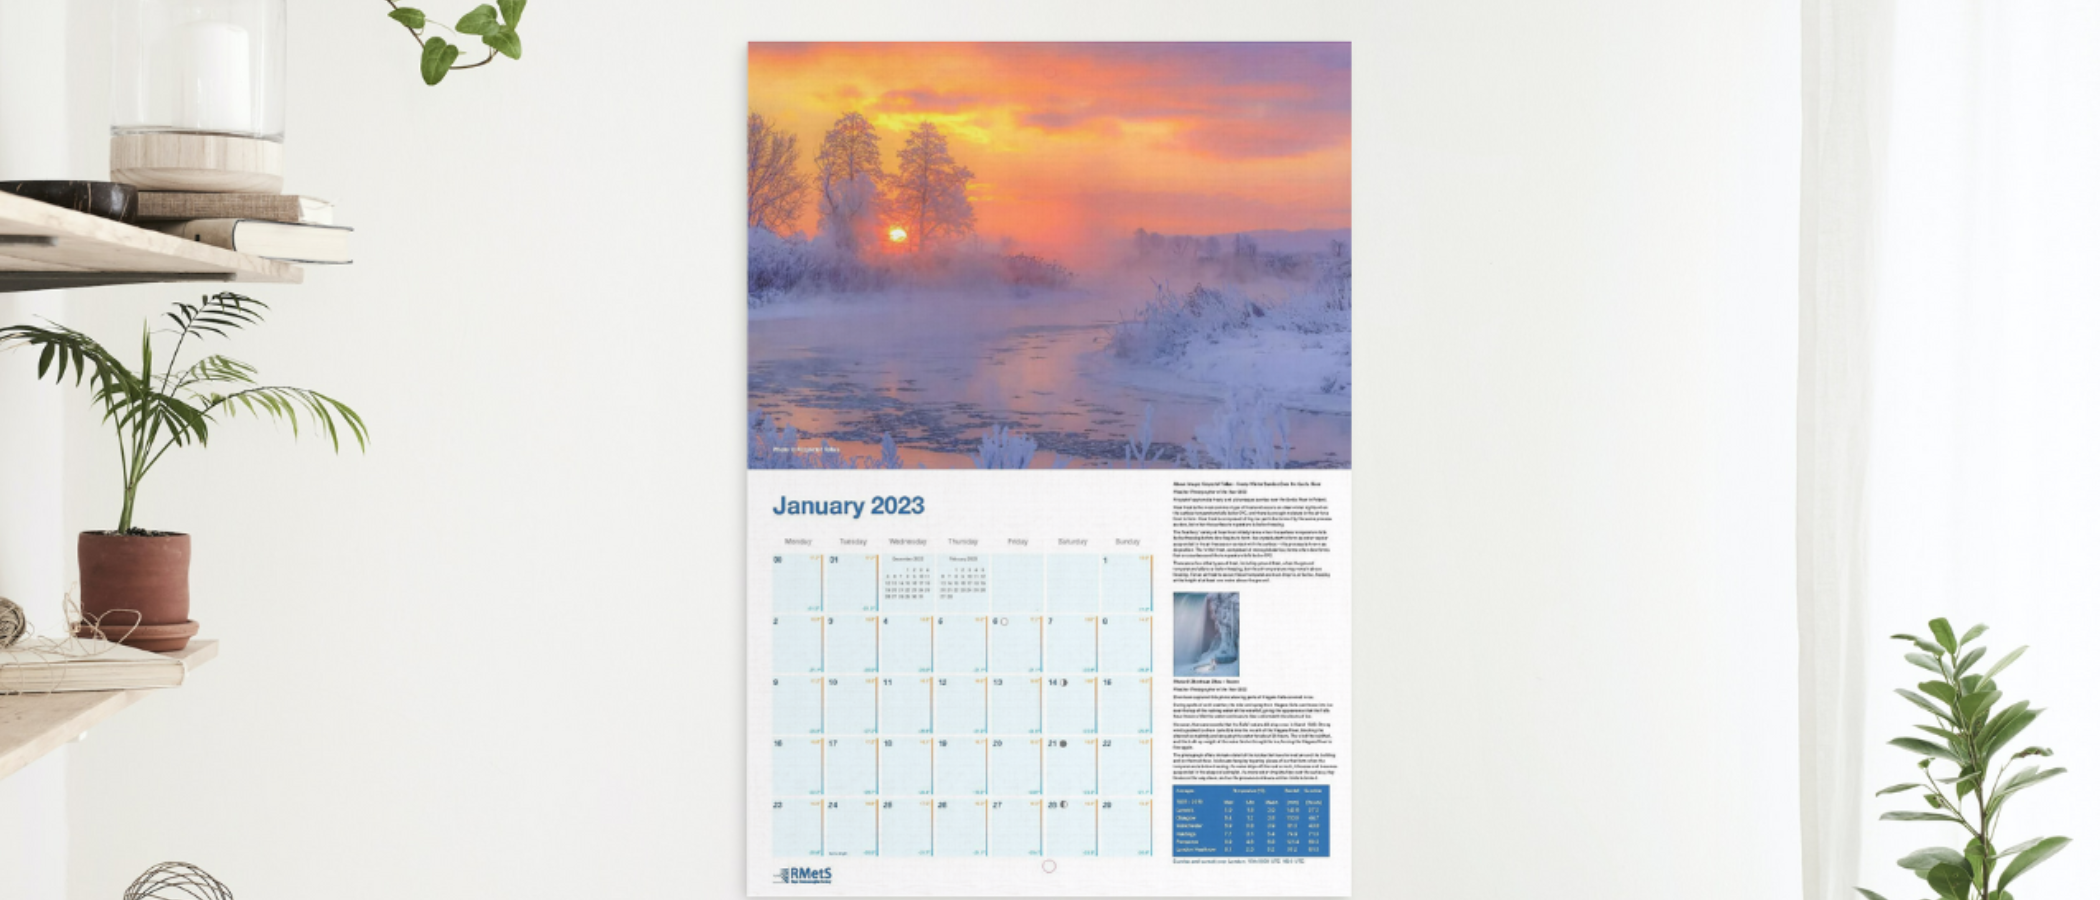 January's page showing a colourful frosty river scene with the calendar grid below. It is shown hanging on a wall